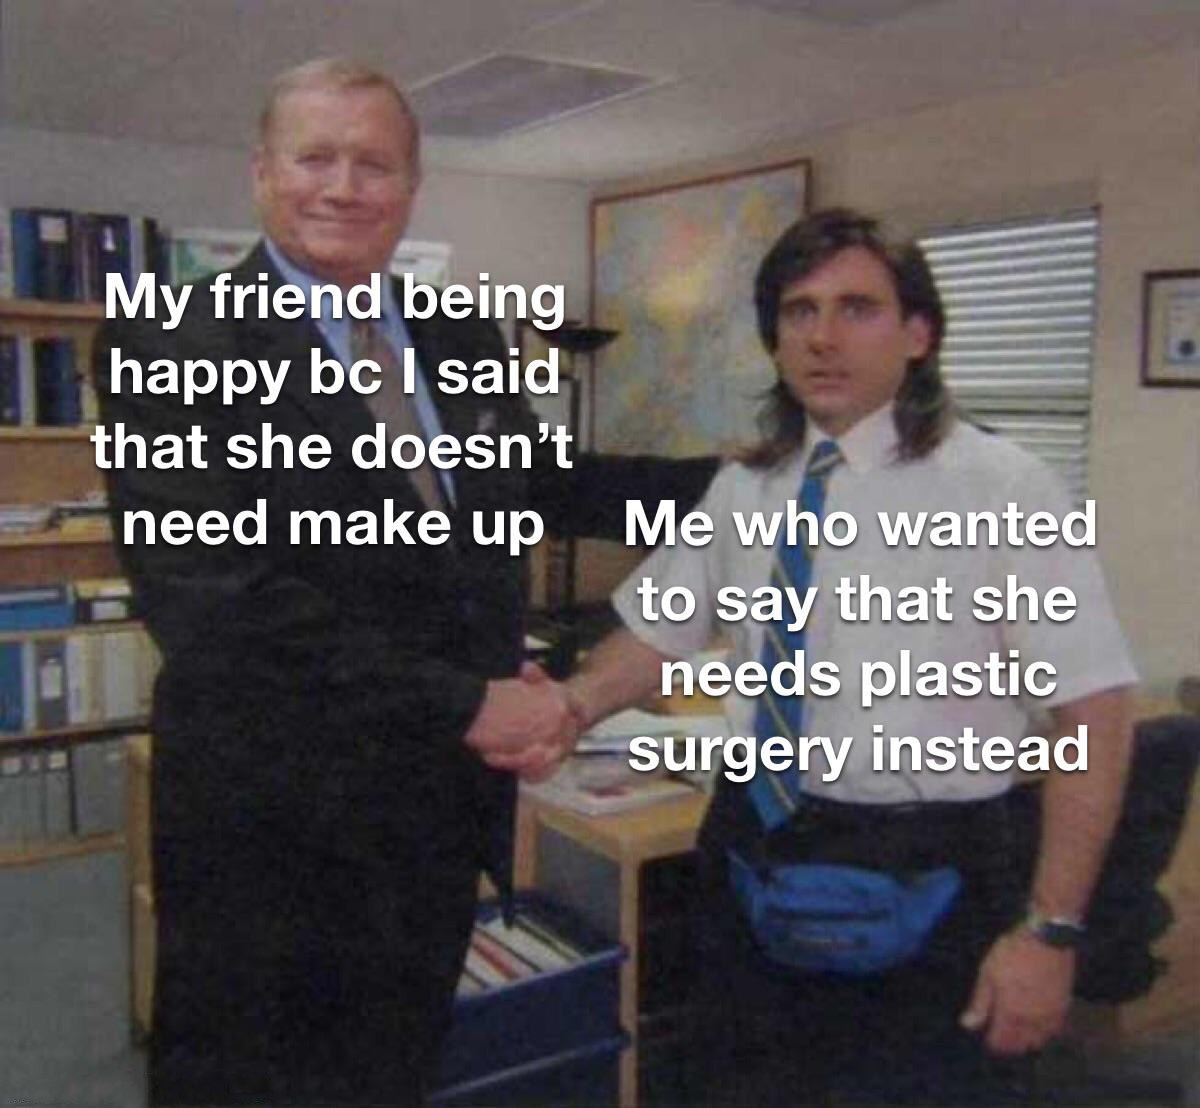 The Office memes - stock market memes reddit - My fri My friend being happy bc I said that she doesn't need make up Me who wanted to say that she needs plastic surgery instead